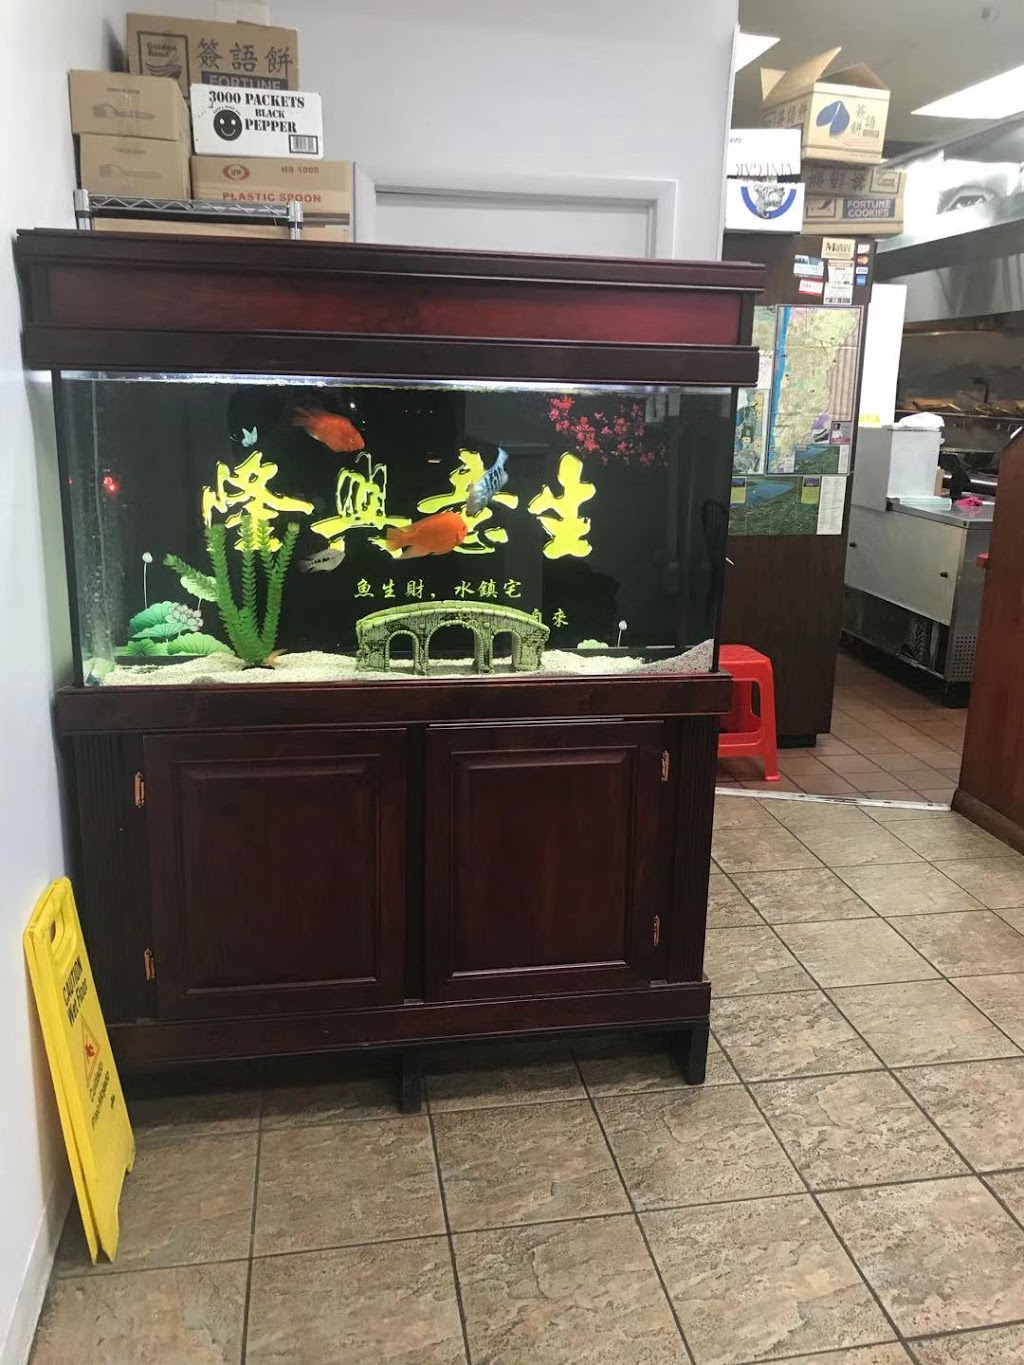 Ginger Chinese Restaurant | 2494 South Rd, Poughkeepsie, NY 12601 | Phone: (845) 462-1020